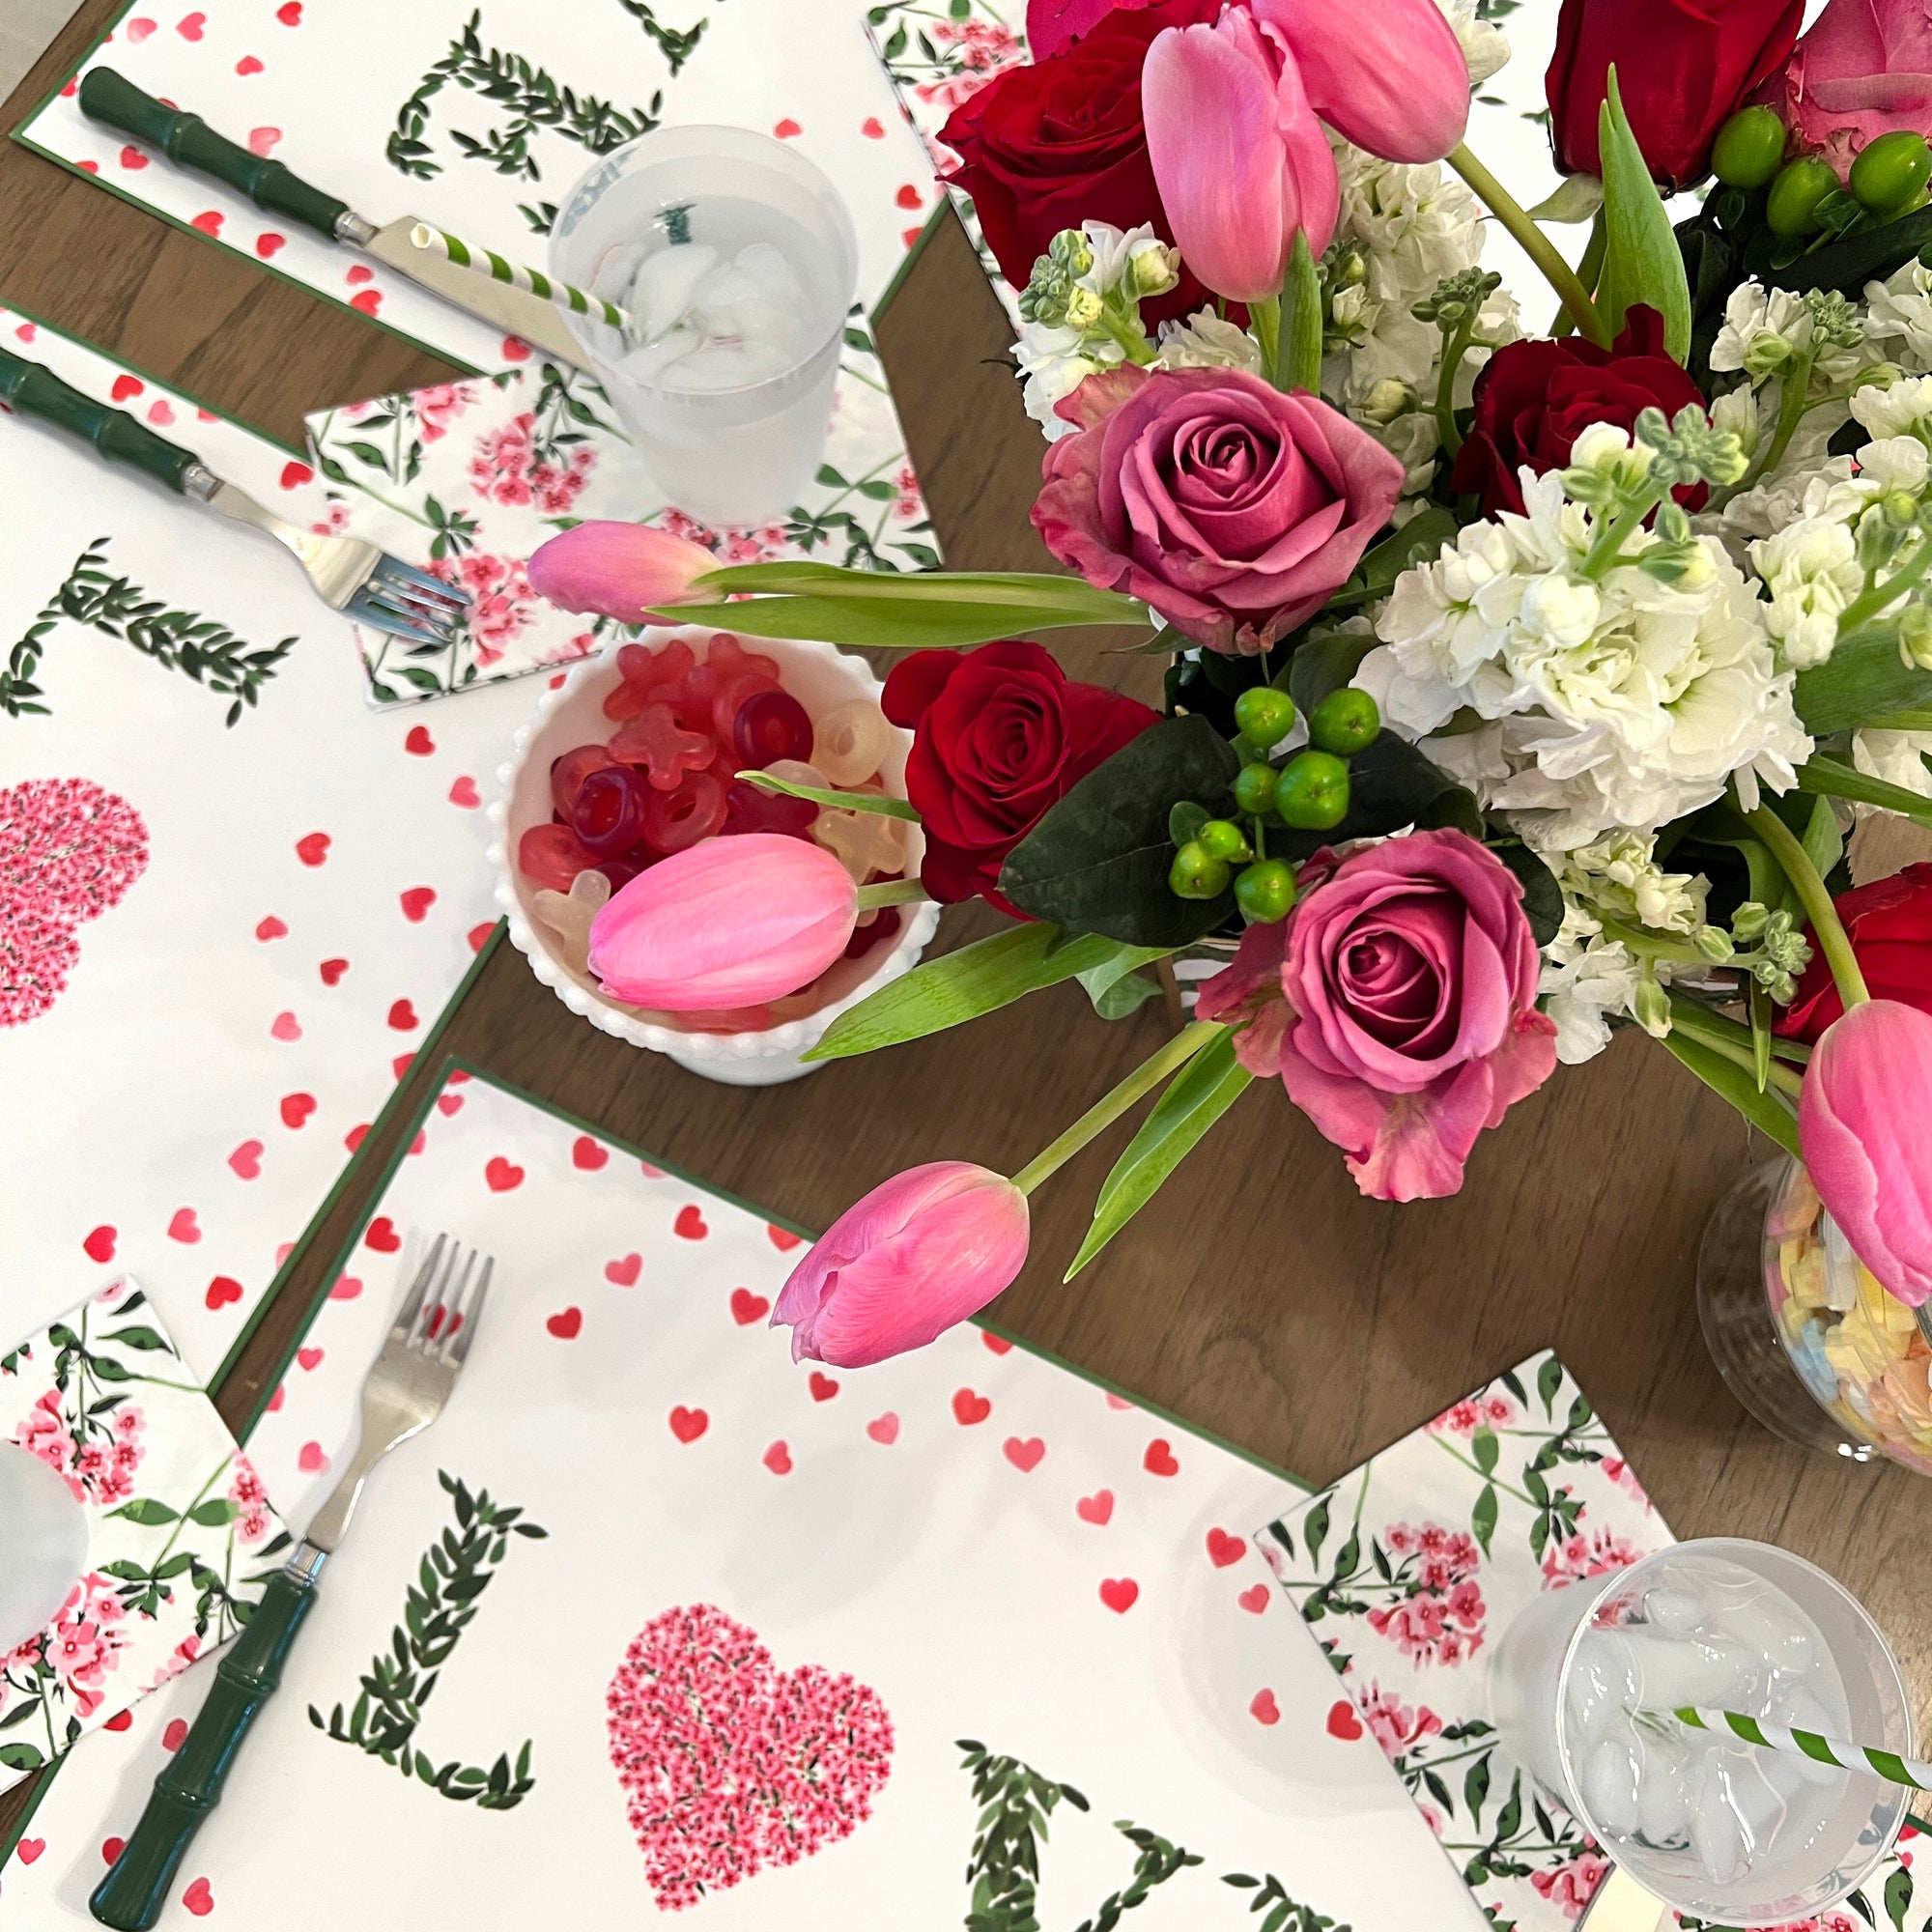 Pink + Green Valentine's Day Tablesetting